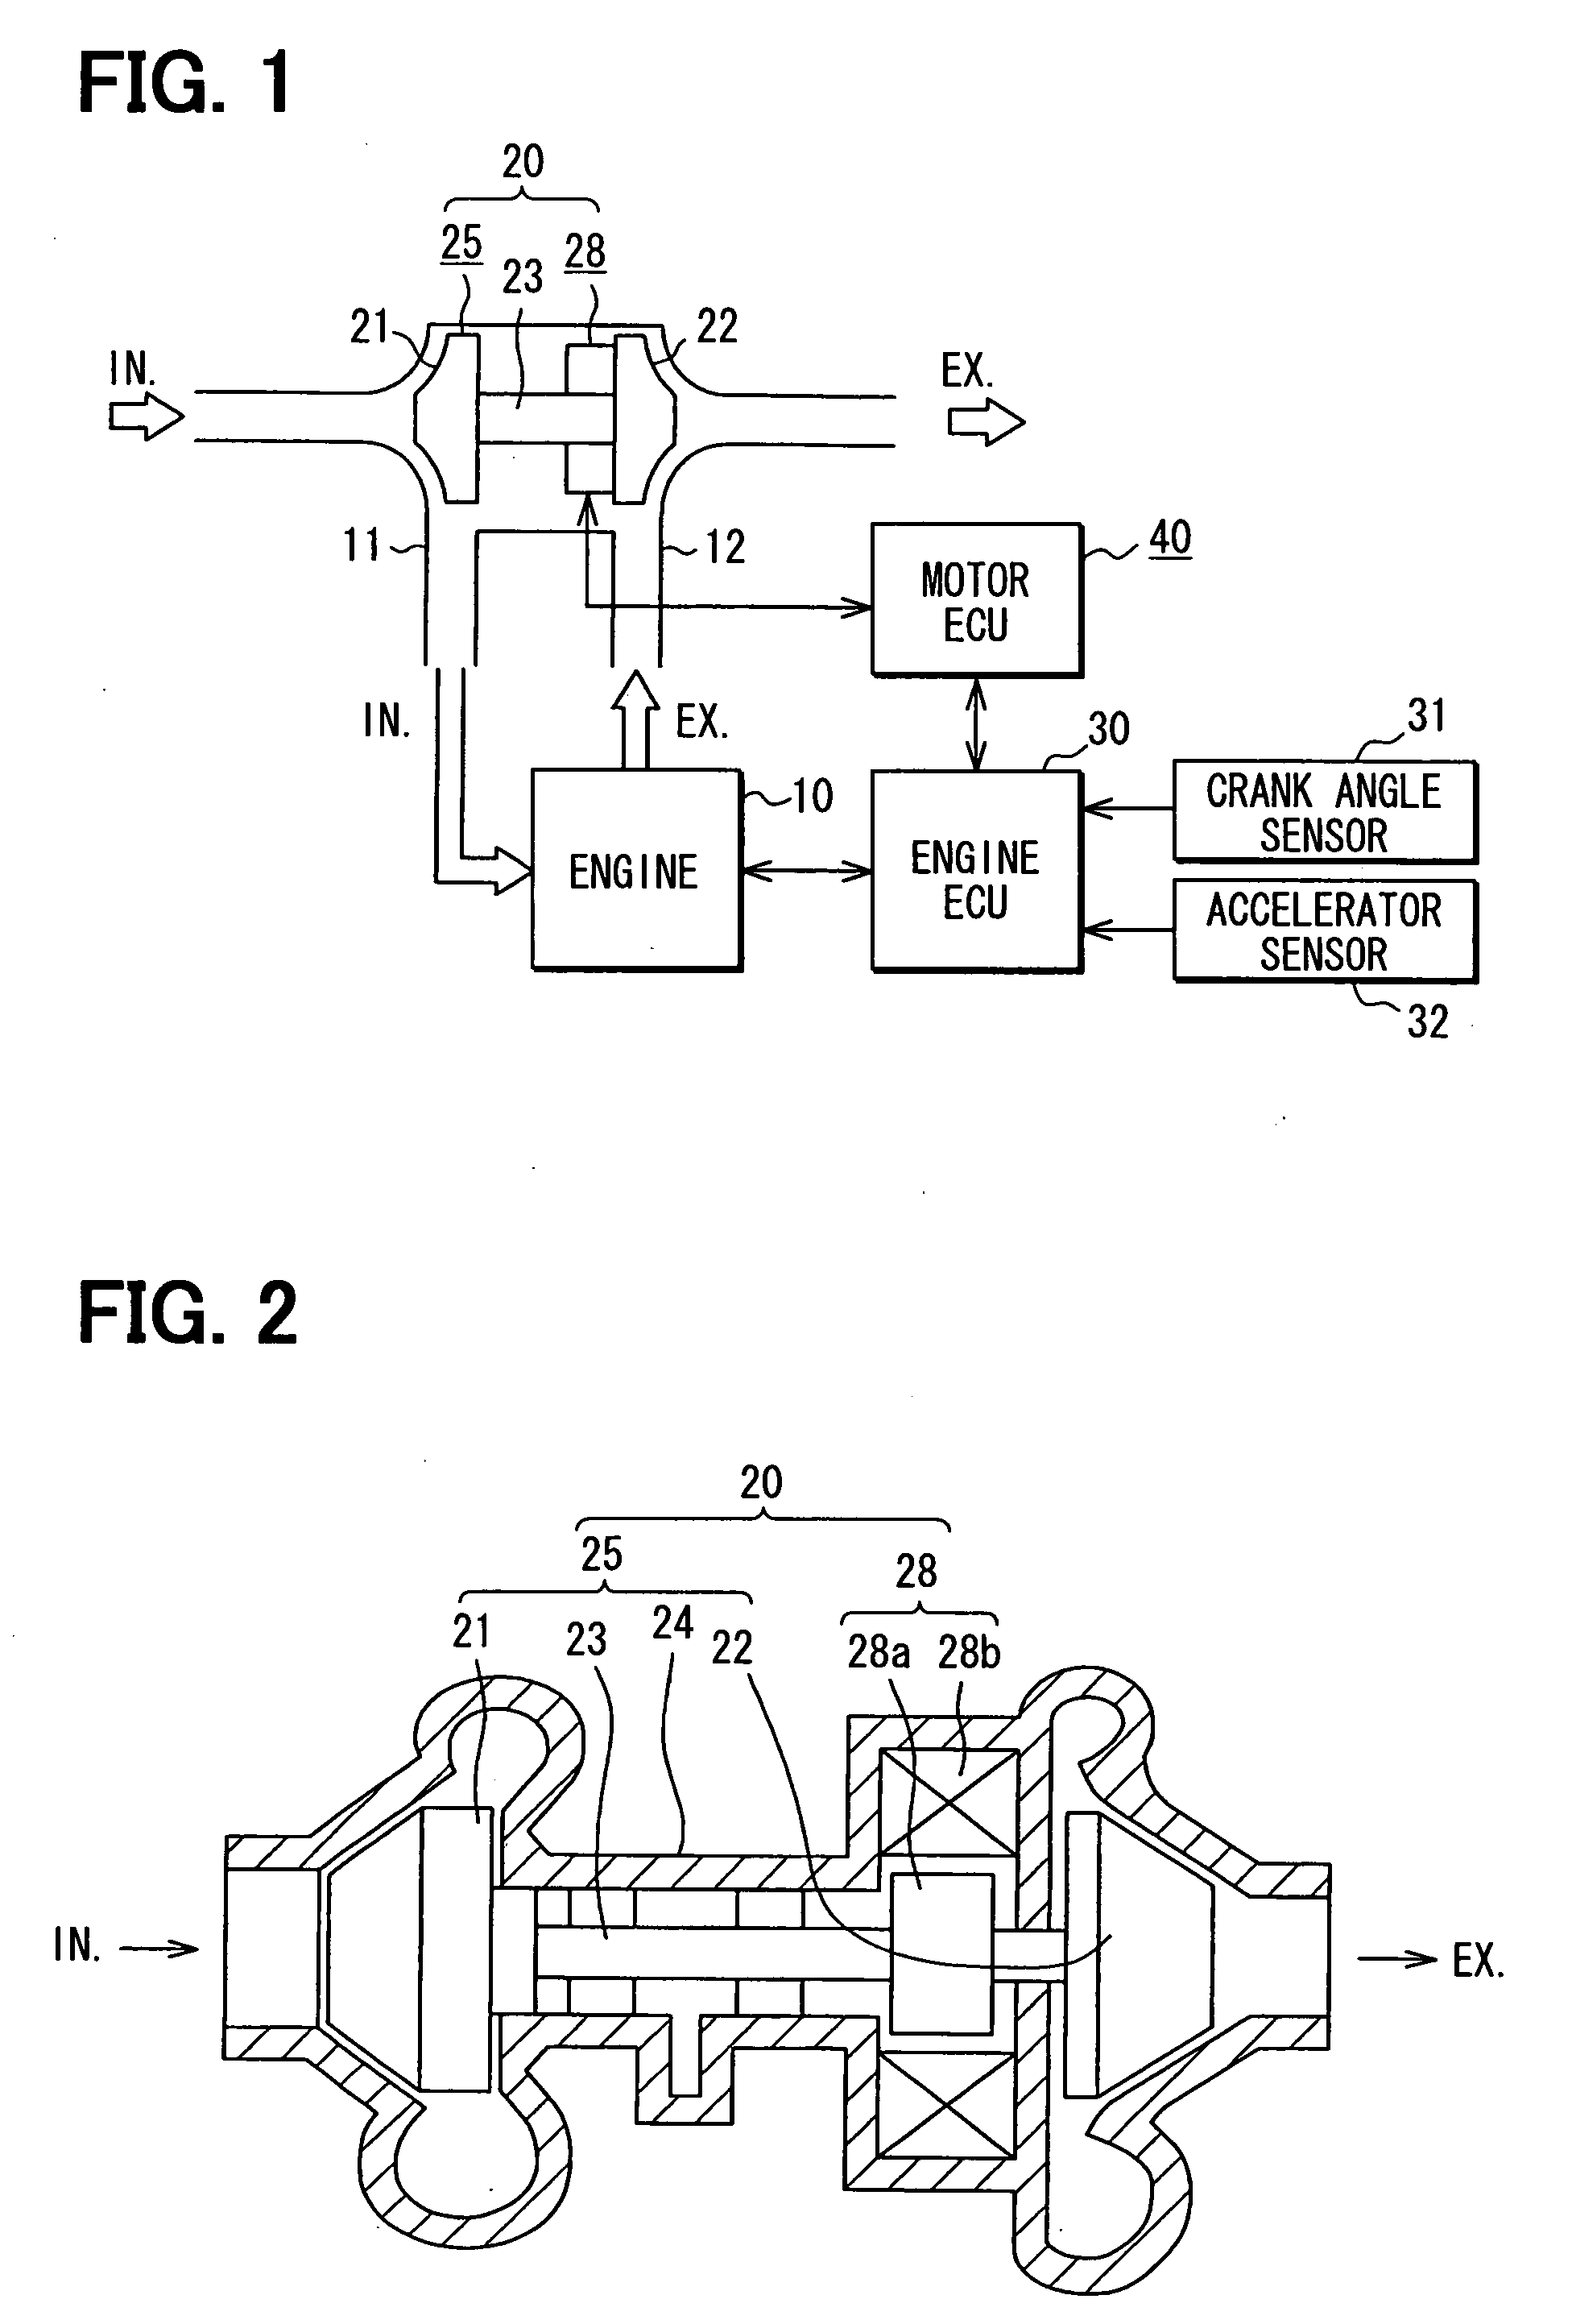 Controller for turbocharger with electric motor